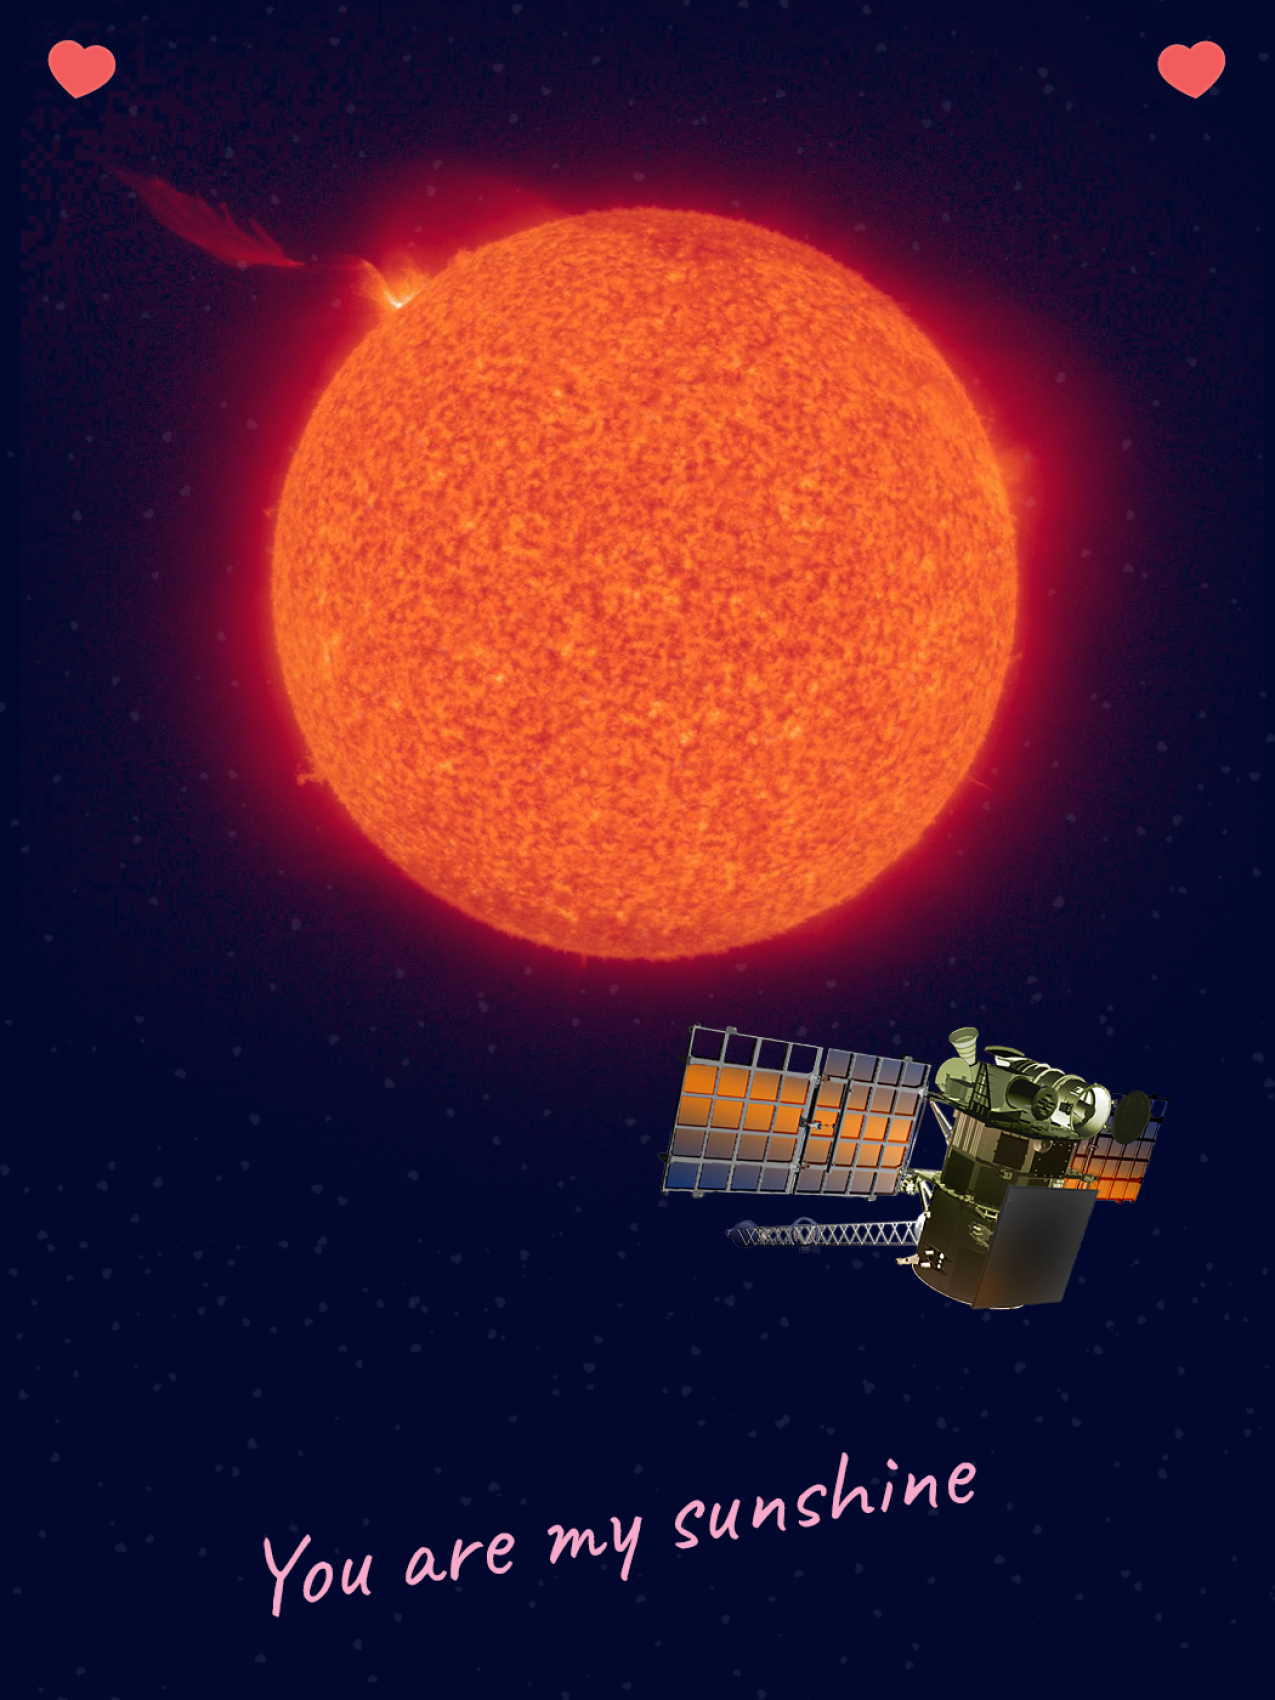 An image of the sun with an illustrated satellite orbiting around it. There is a heart in each corner of the card and text that says: You are my sunshine